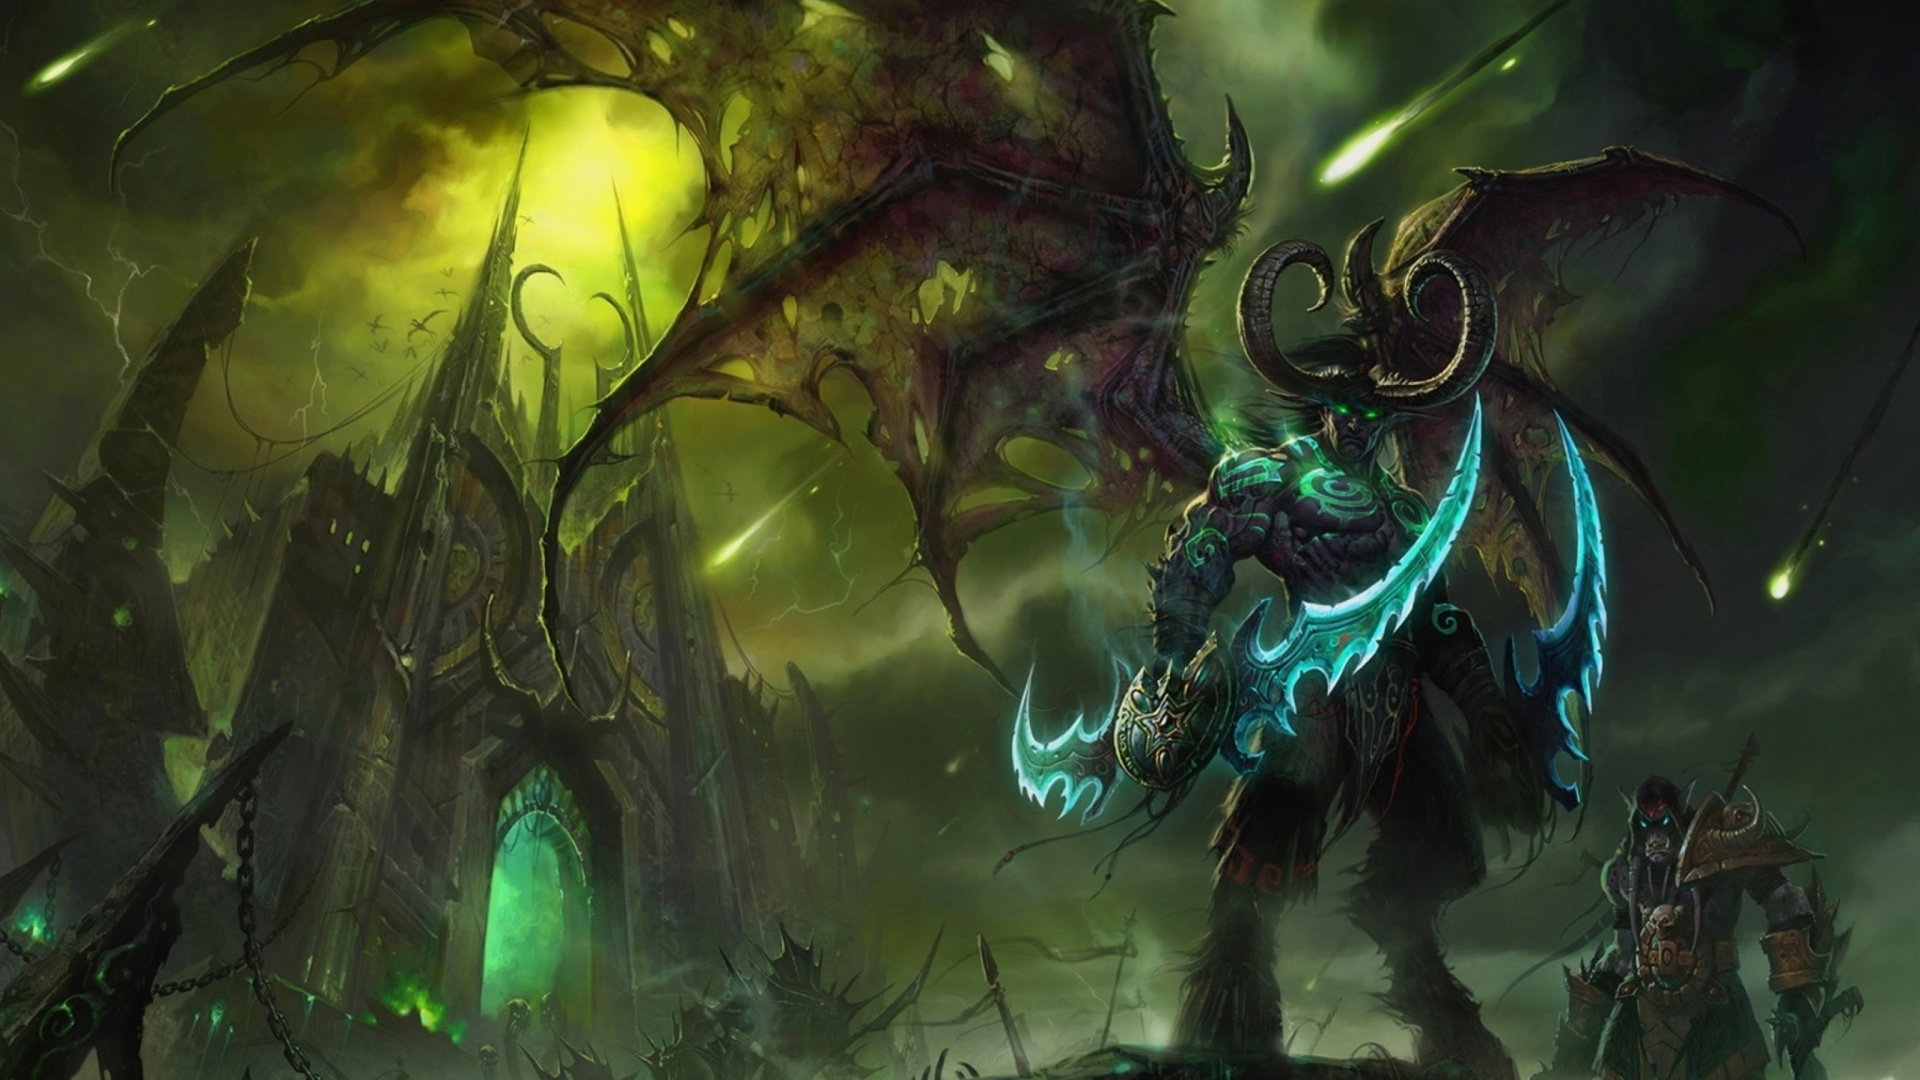 Lord of Outland Warcraft III wallpaper 1920x1080